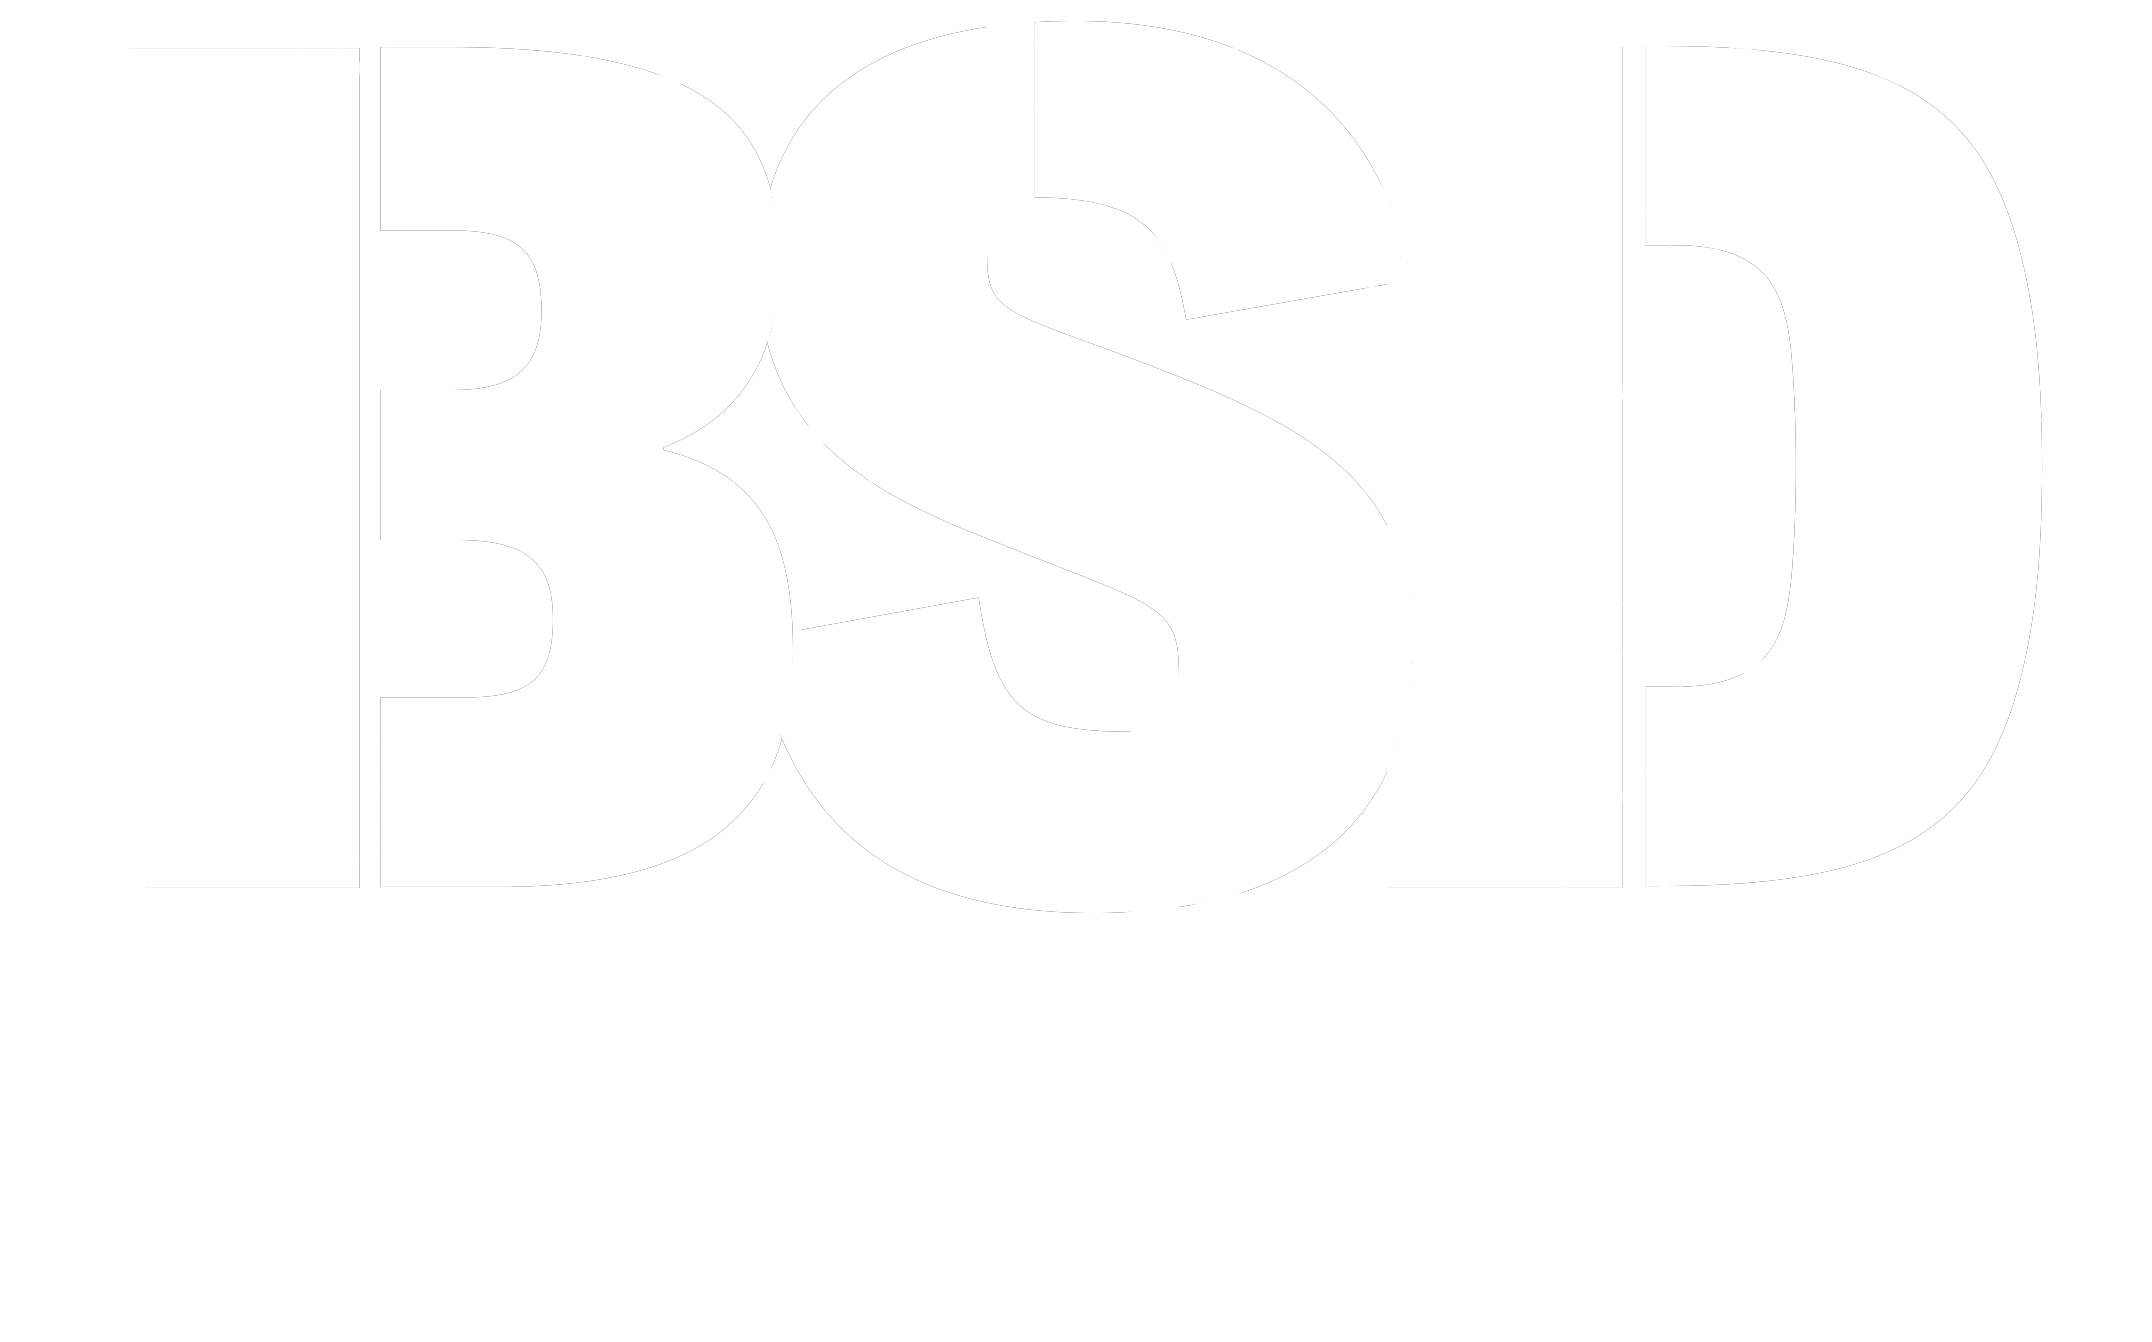 Blowing Silence Sown